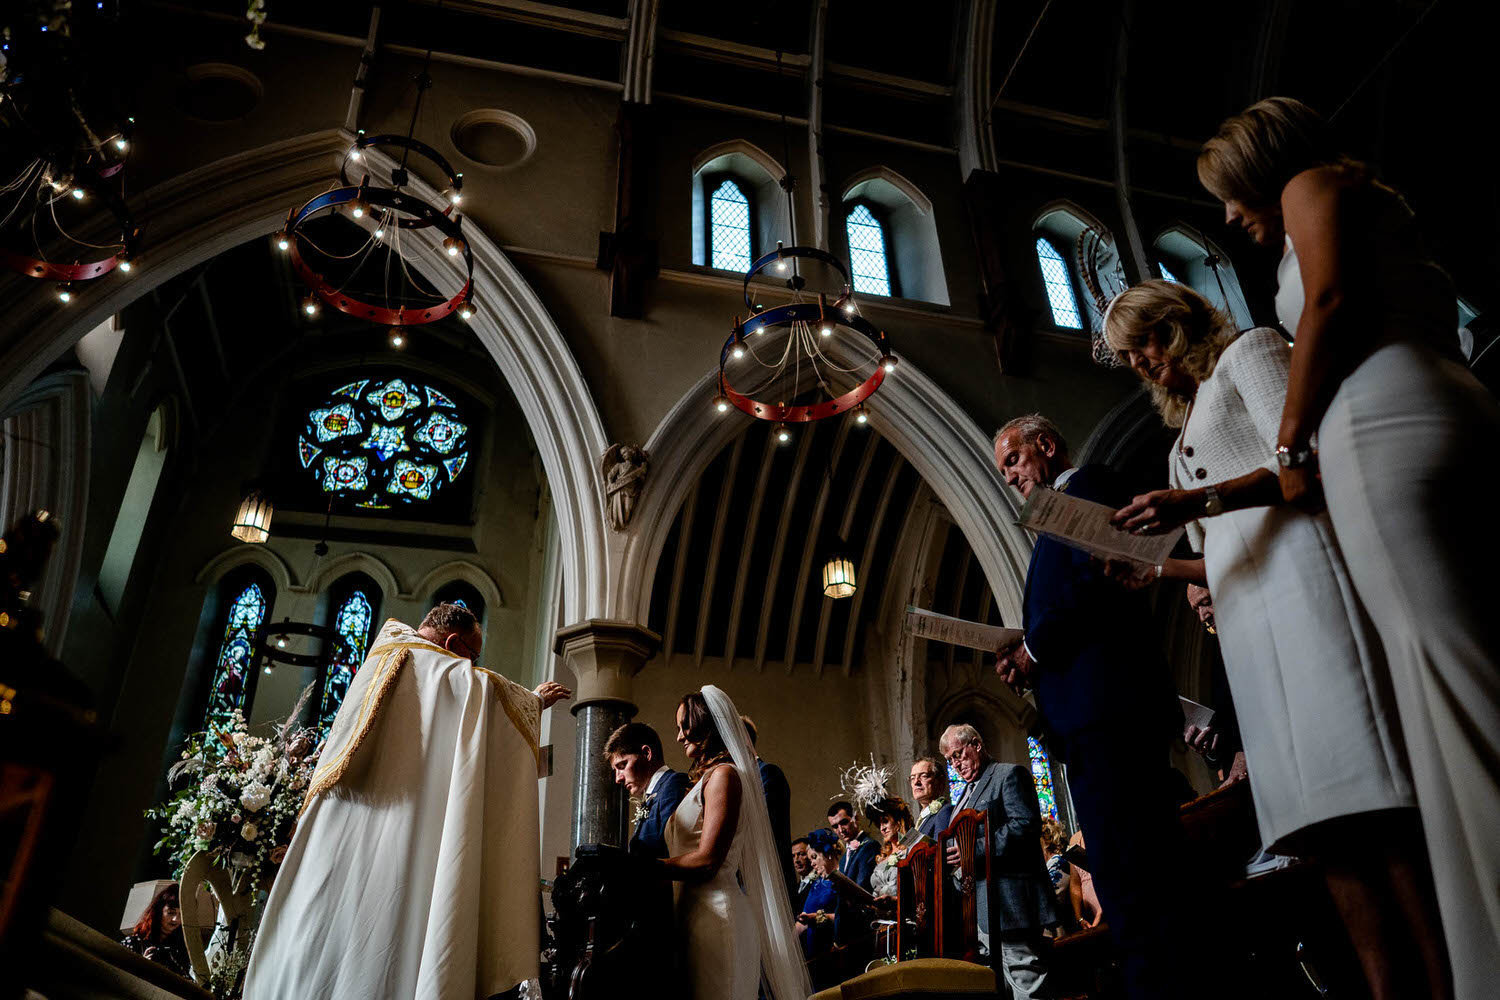 a vicar gives his blessing to a wedding couple in a church wedding